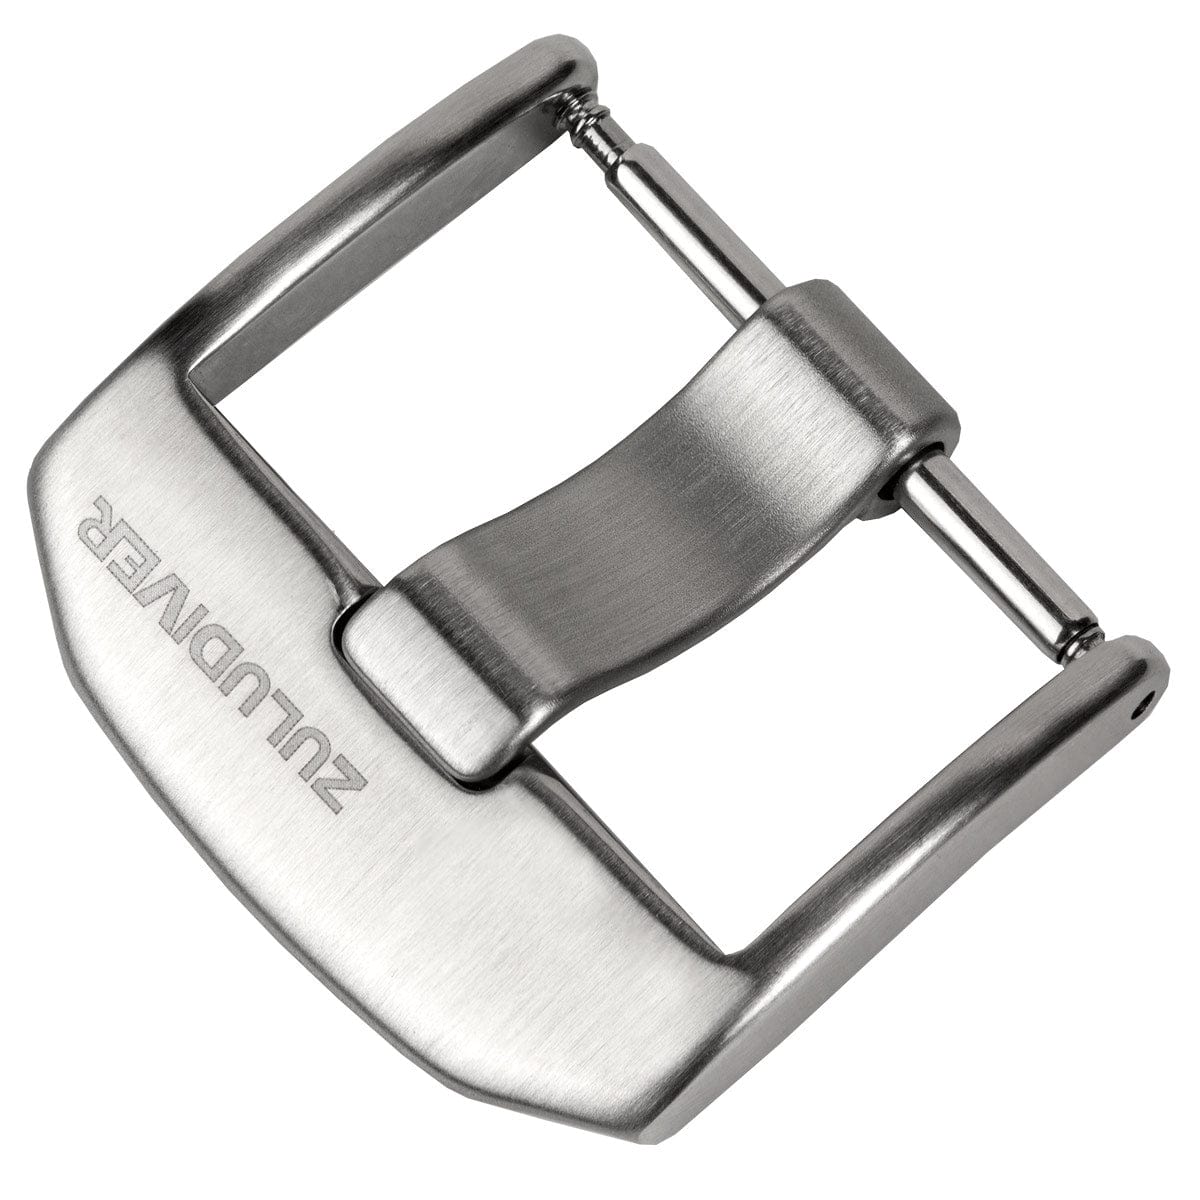 Replacement Buckle for Diver's Style Strap by ZULUDIVER - Polished